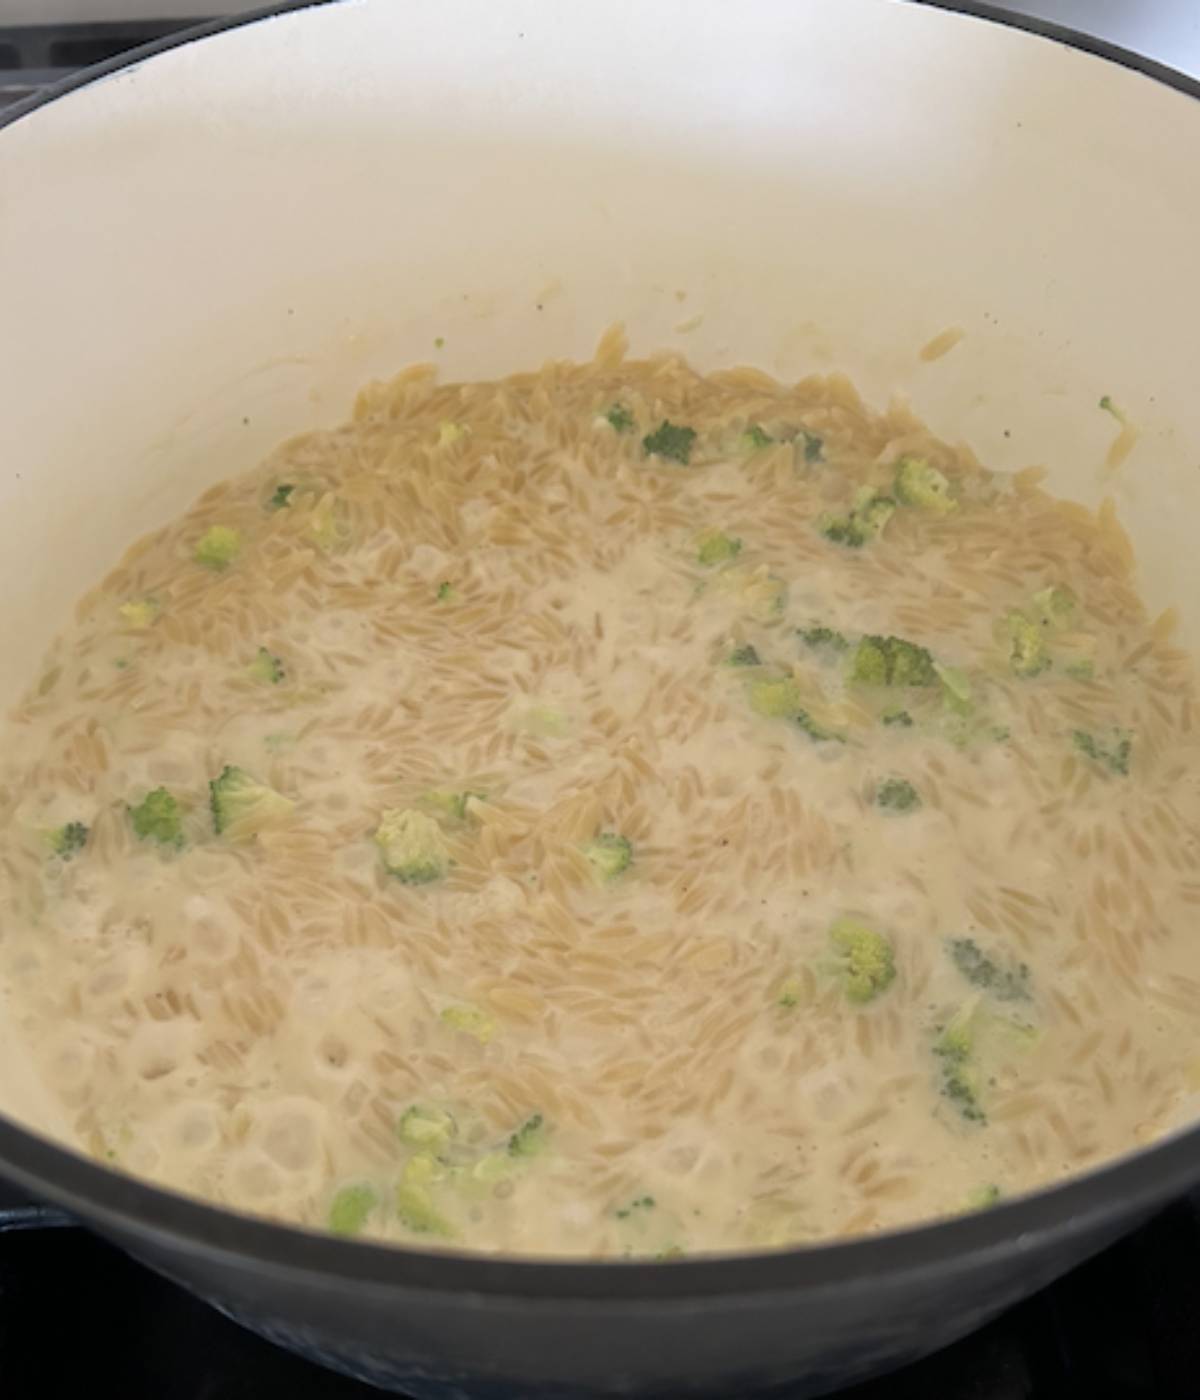 Broccoli orzo cooking in pot.